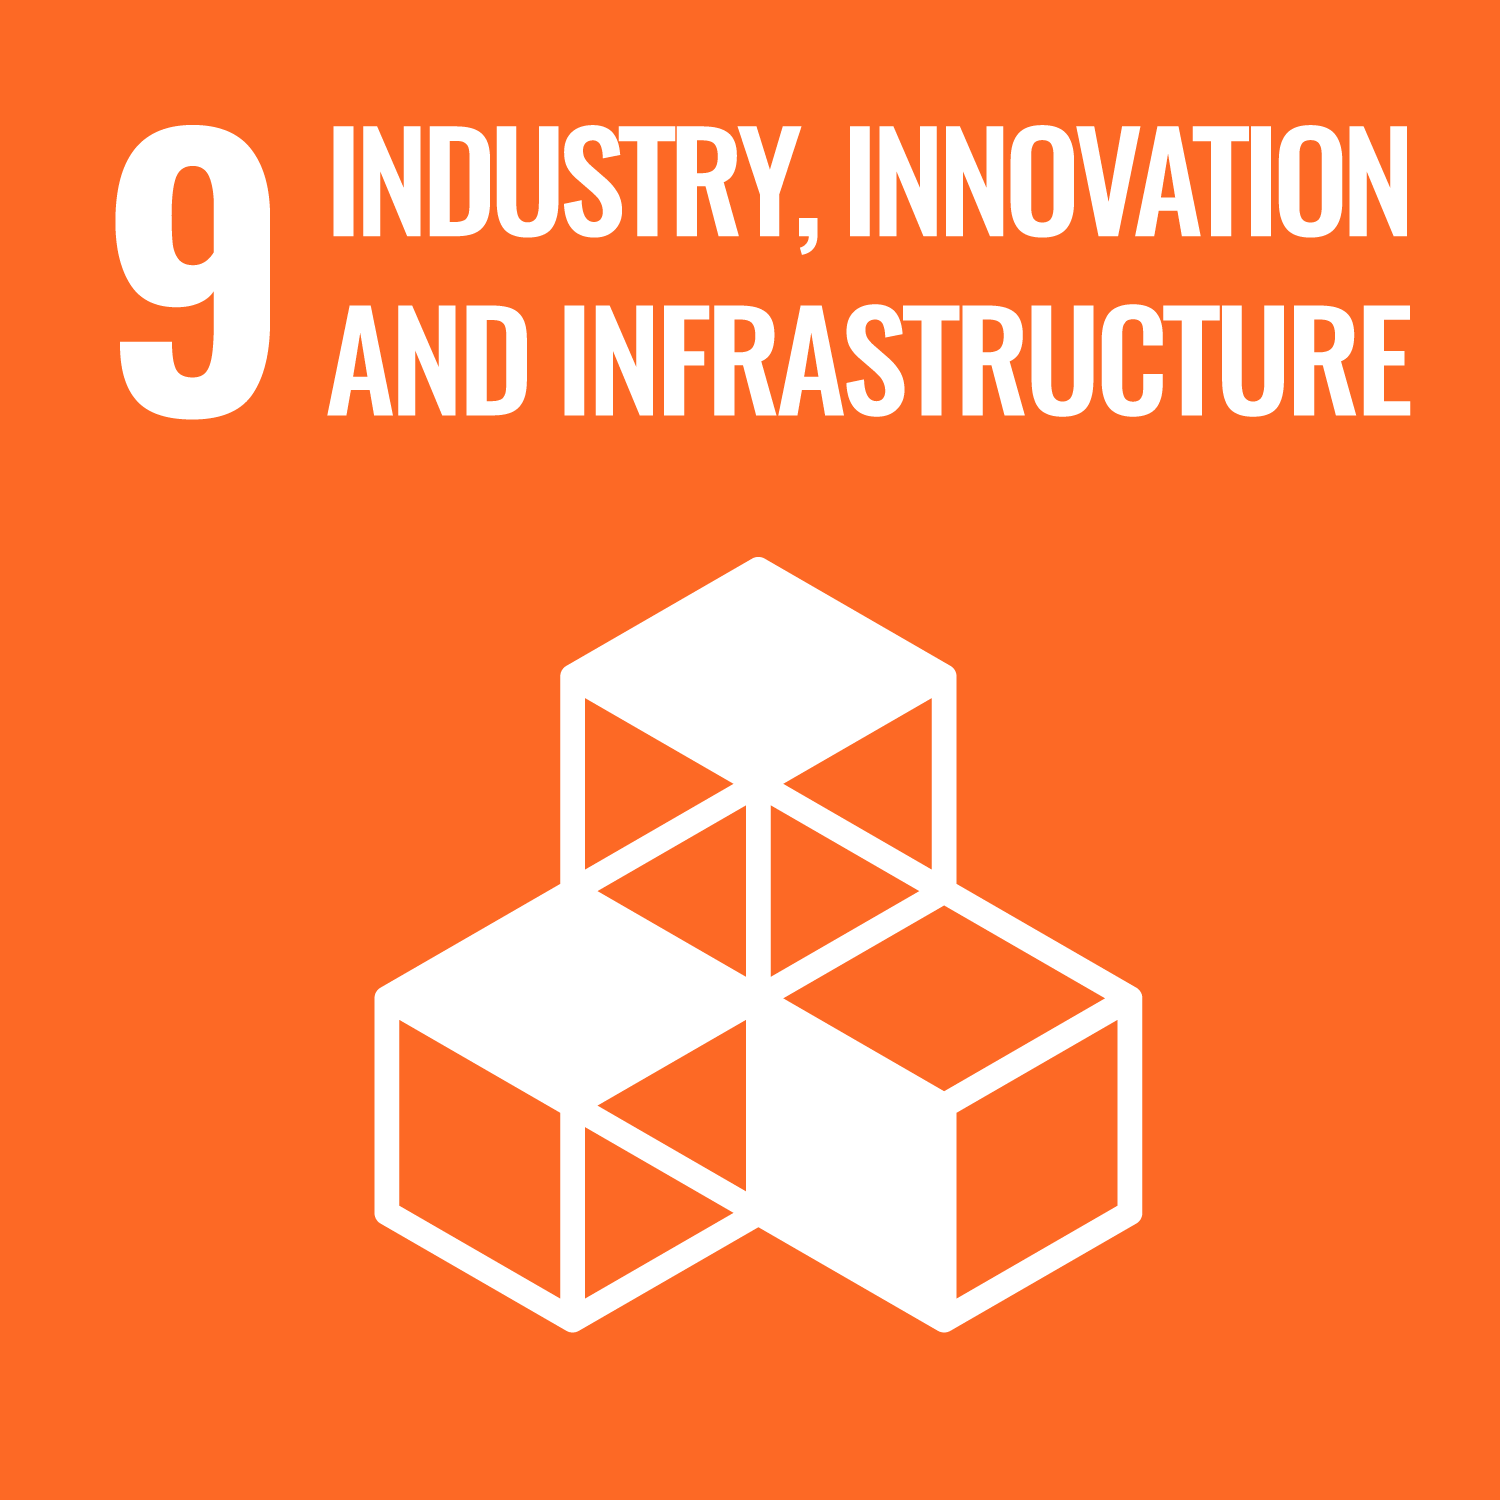 INDUSTRIAL INNOVATION AND INFRASTRUCTURE